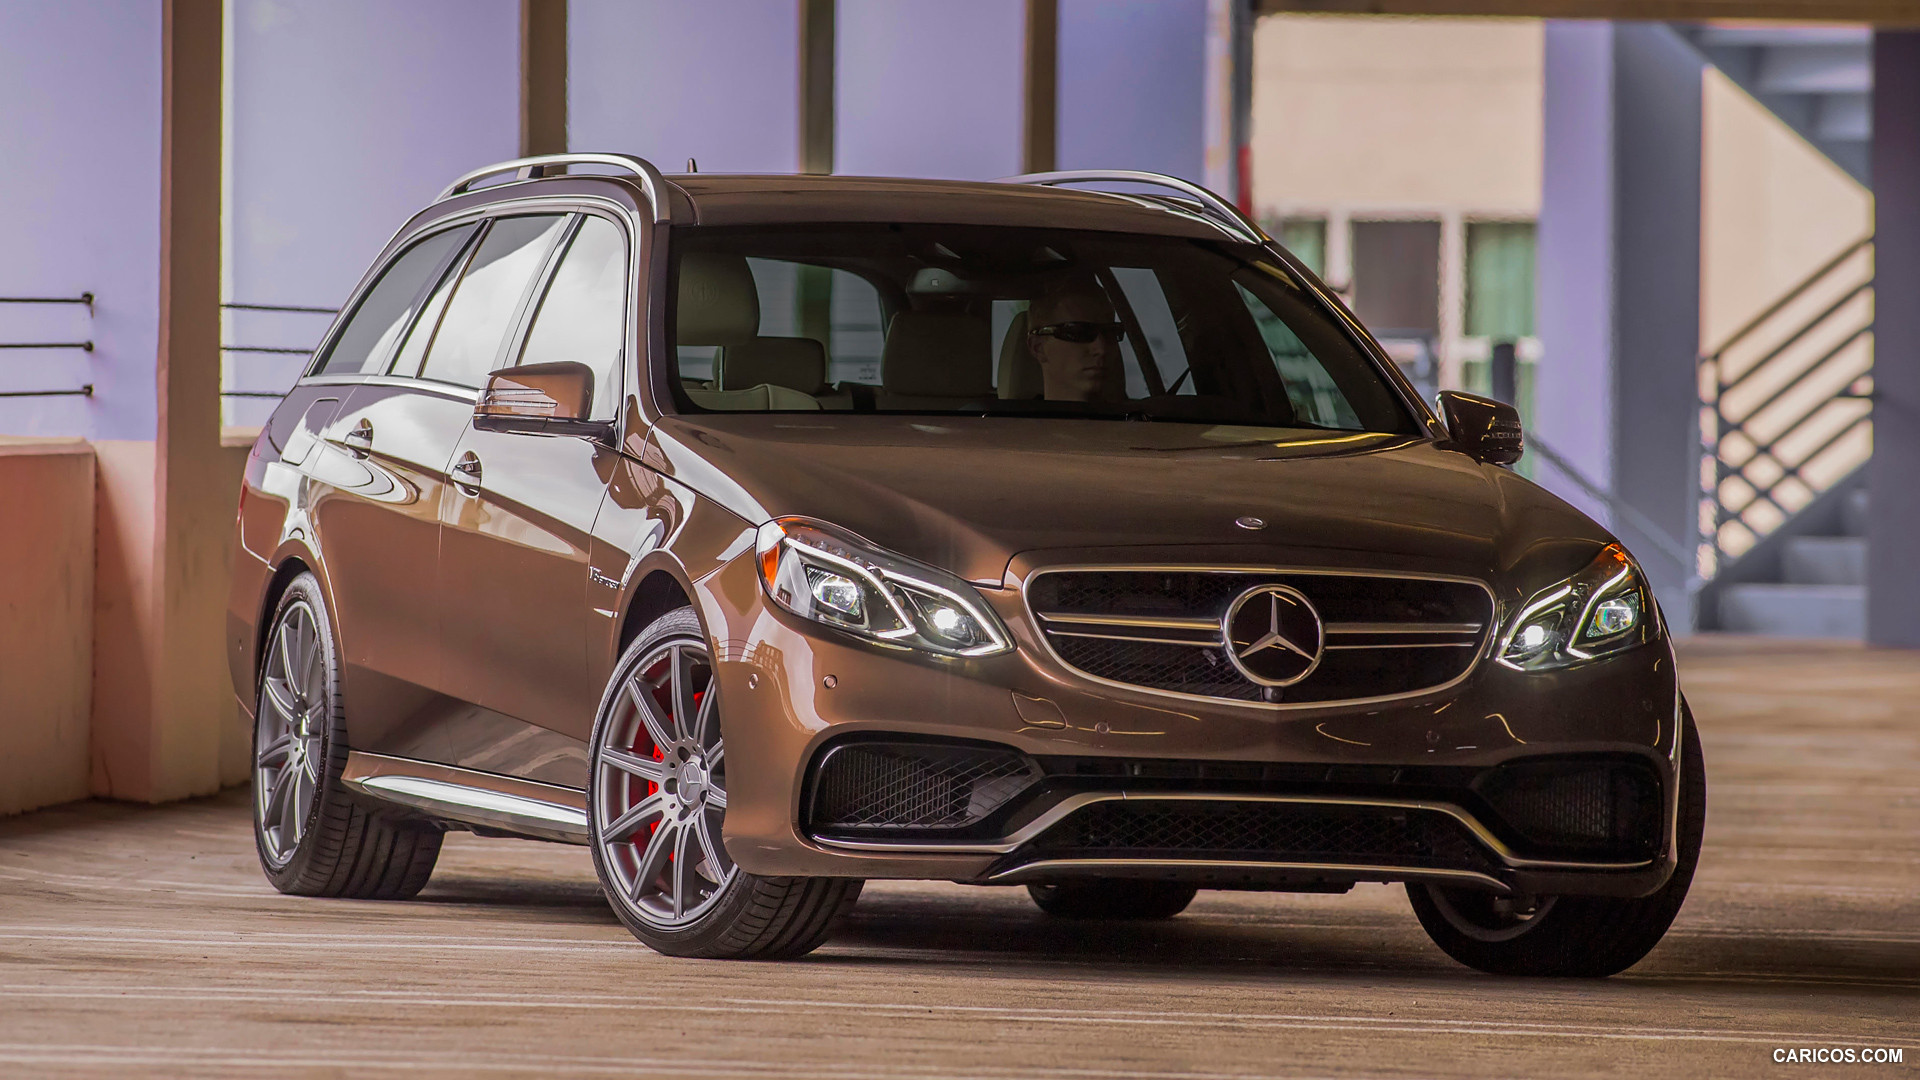  2014 Mercedes-Benz E 63 AMG S-Model Wagon (US Version) - Front, #13 of 27